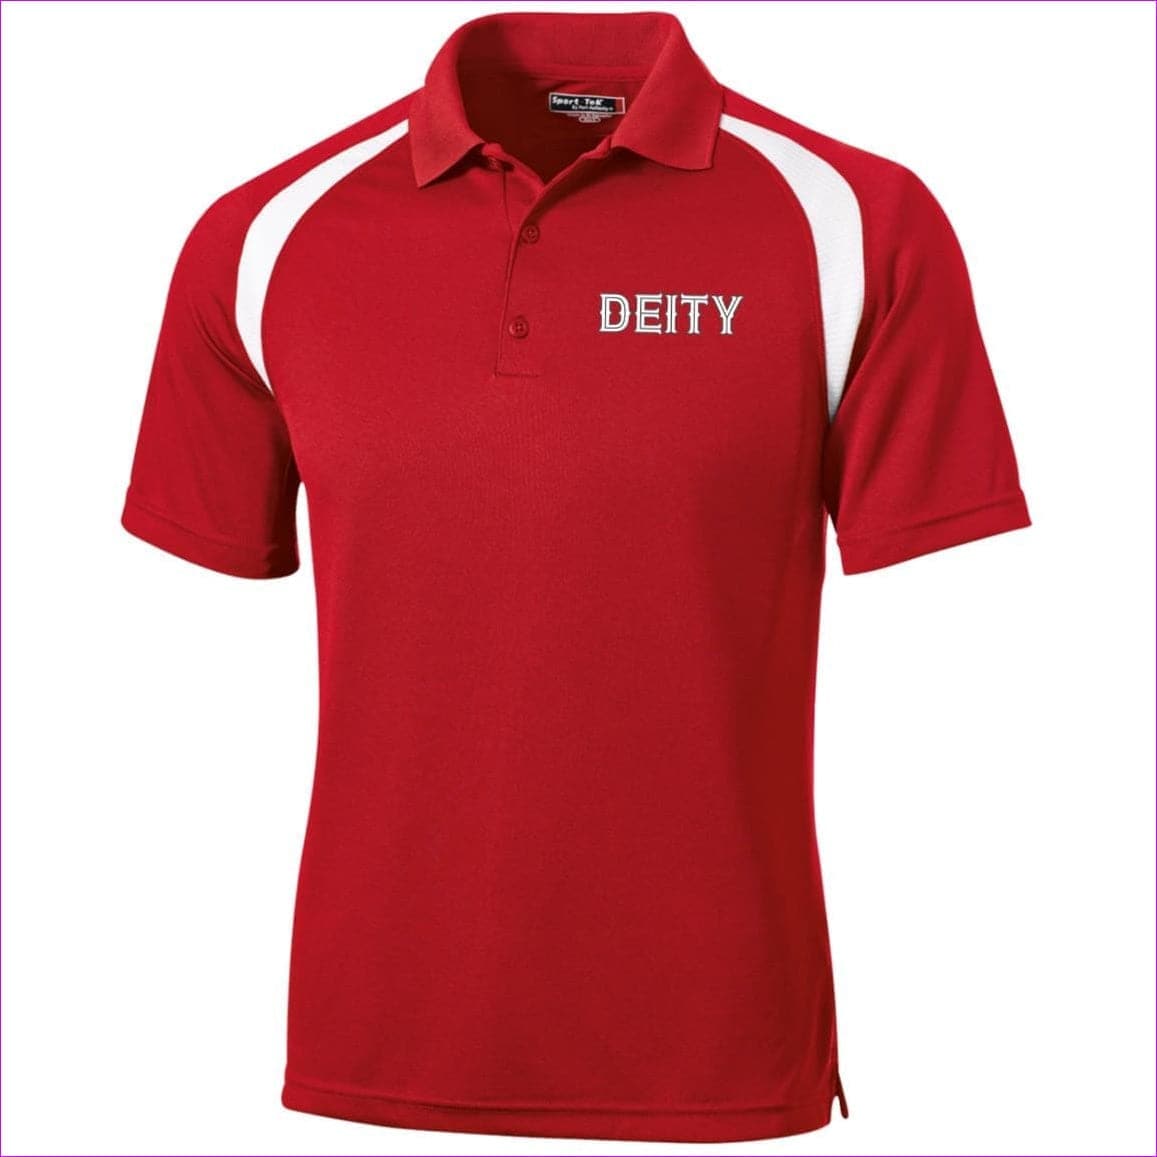 True Red White - Deity Moisture-Wicking Golf Shirt - Mens Polo Shirts at TFC&H Co.